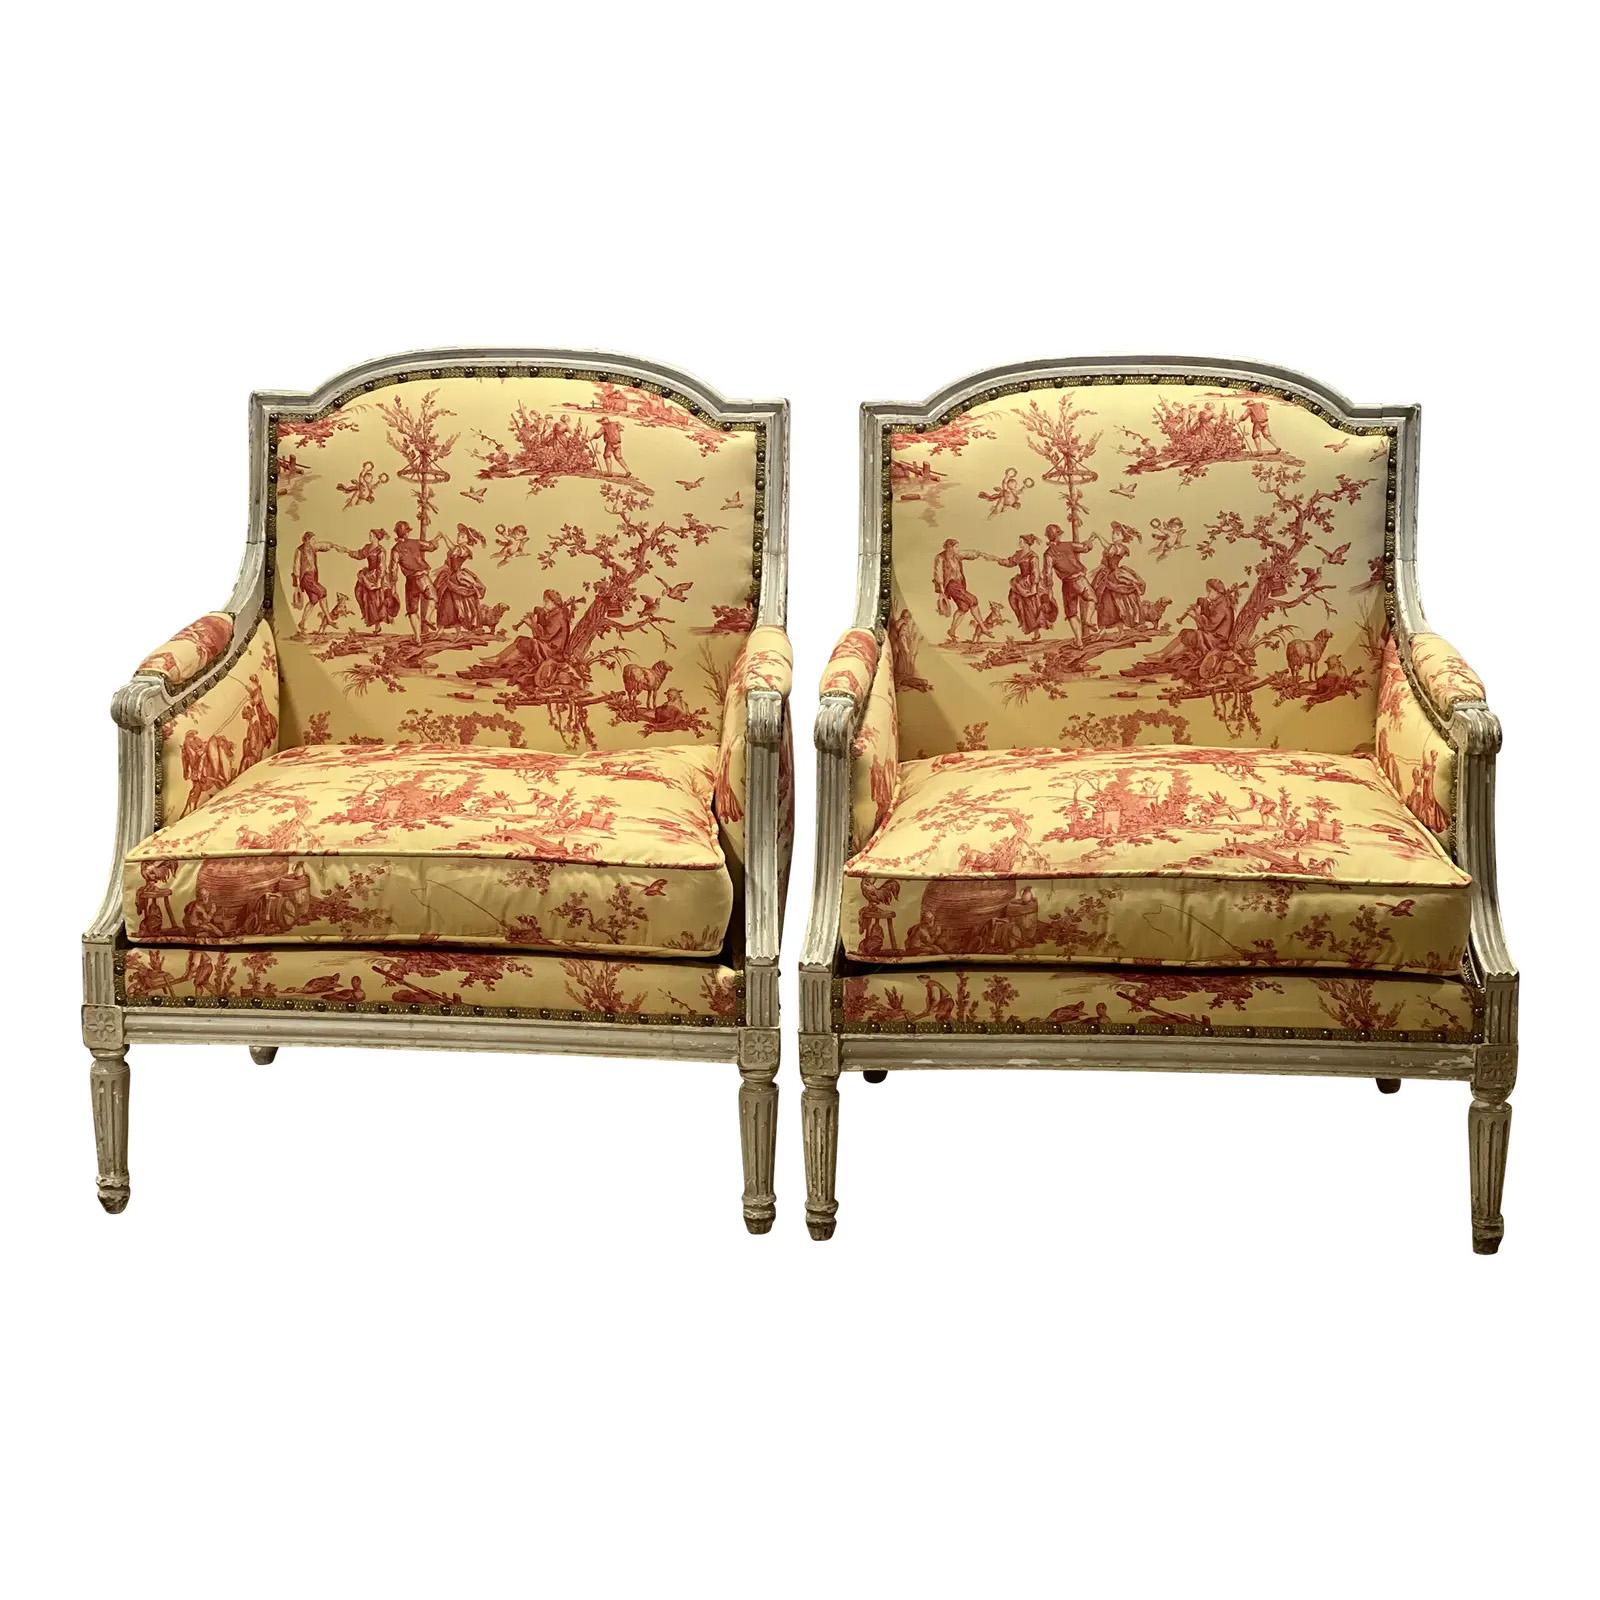 Pair of Late 19th Century Louis XVI Style French Marquis Chairs In Good Condition For Sale In Scottsdale, AZ